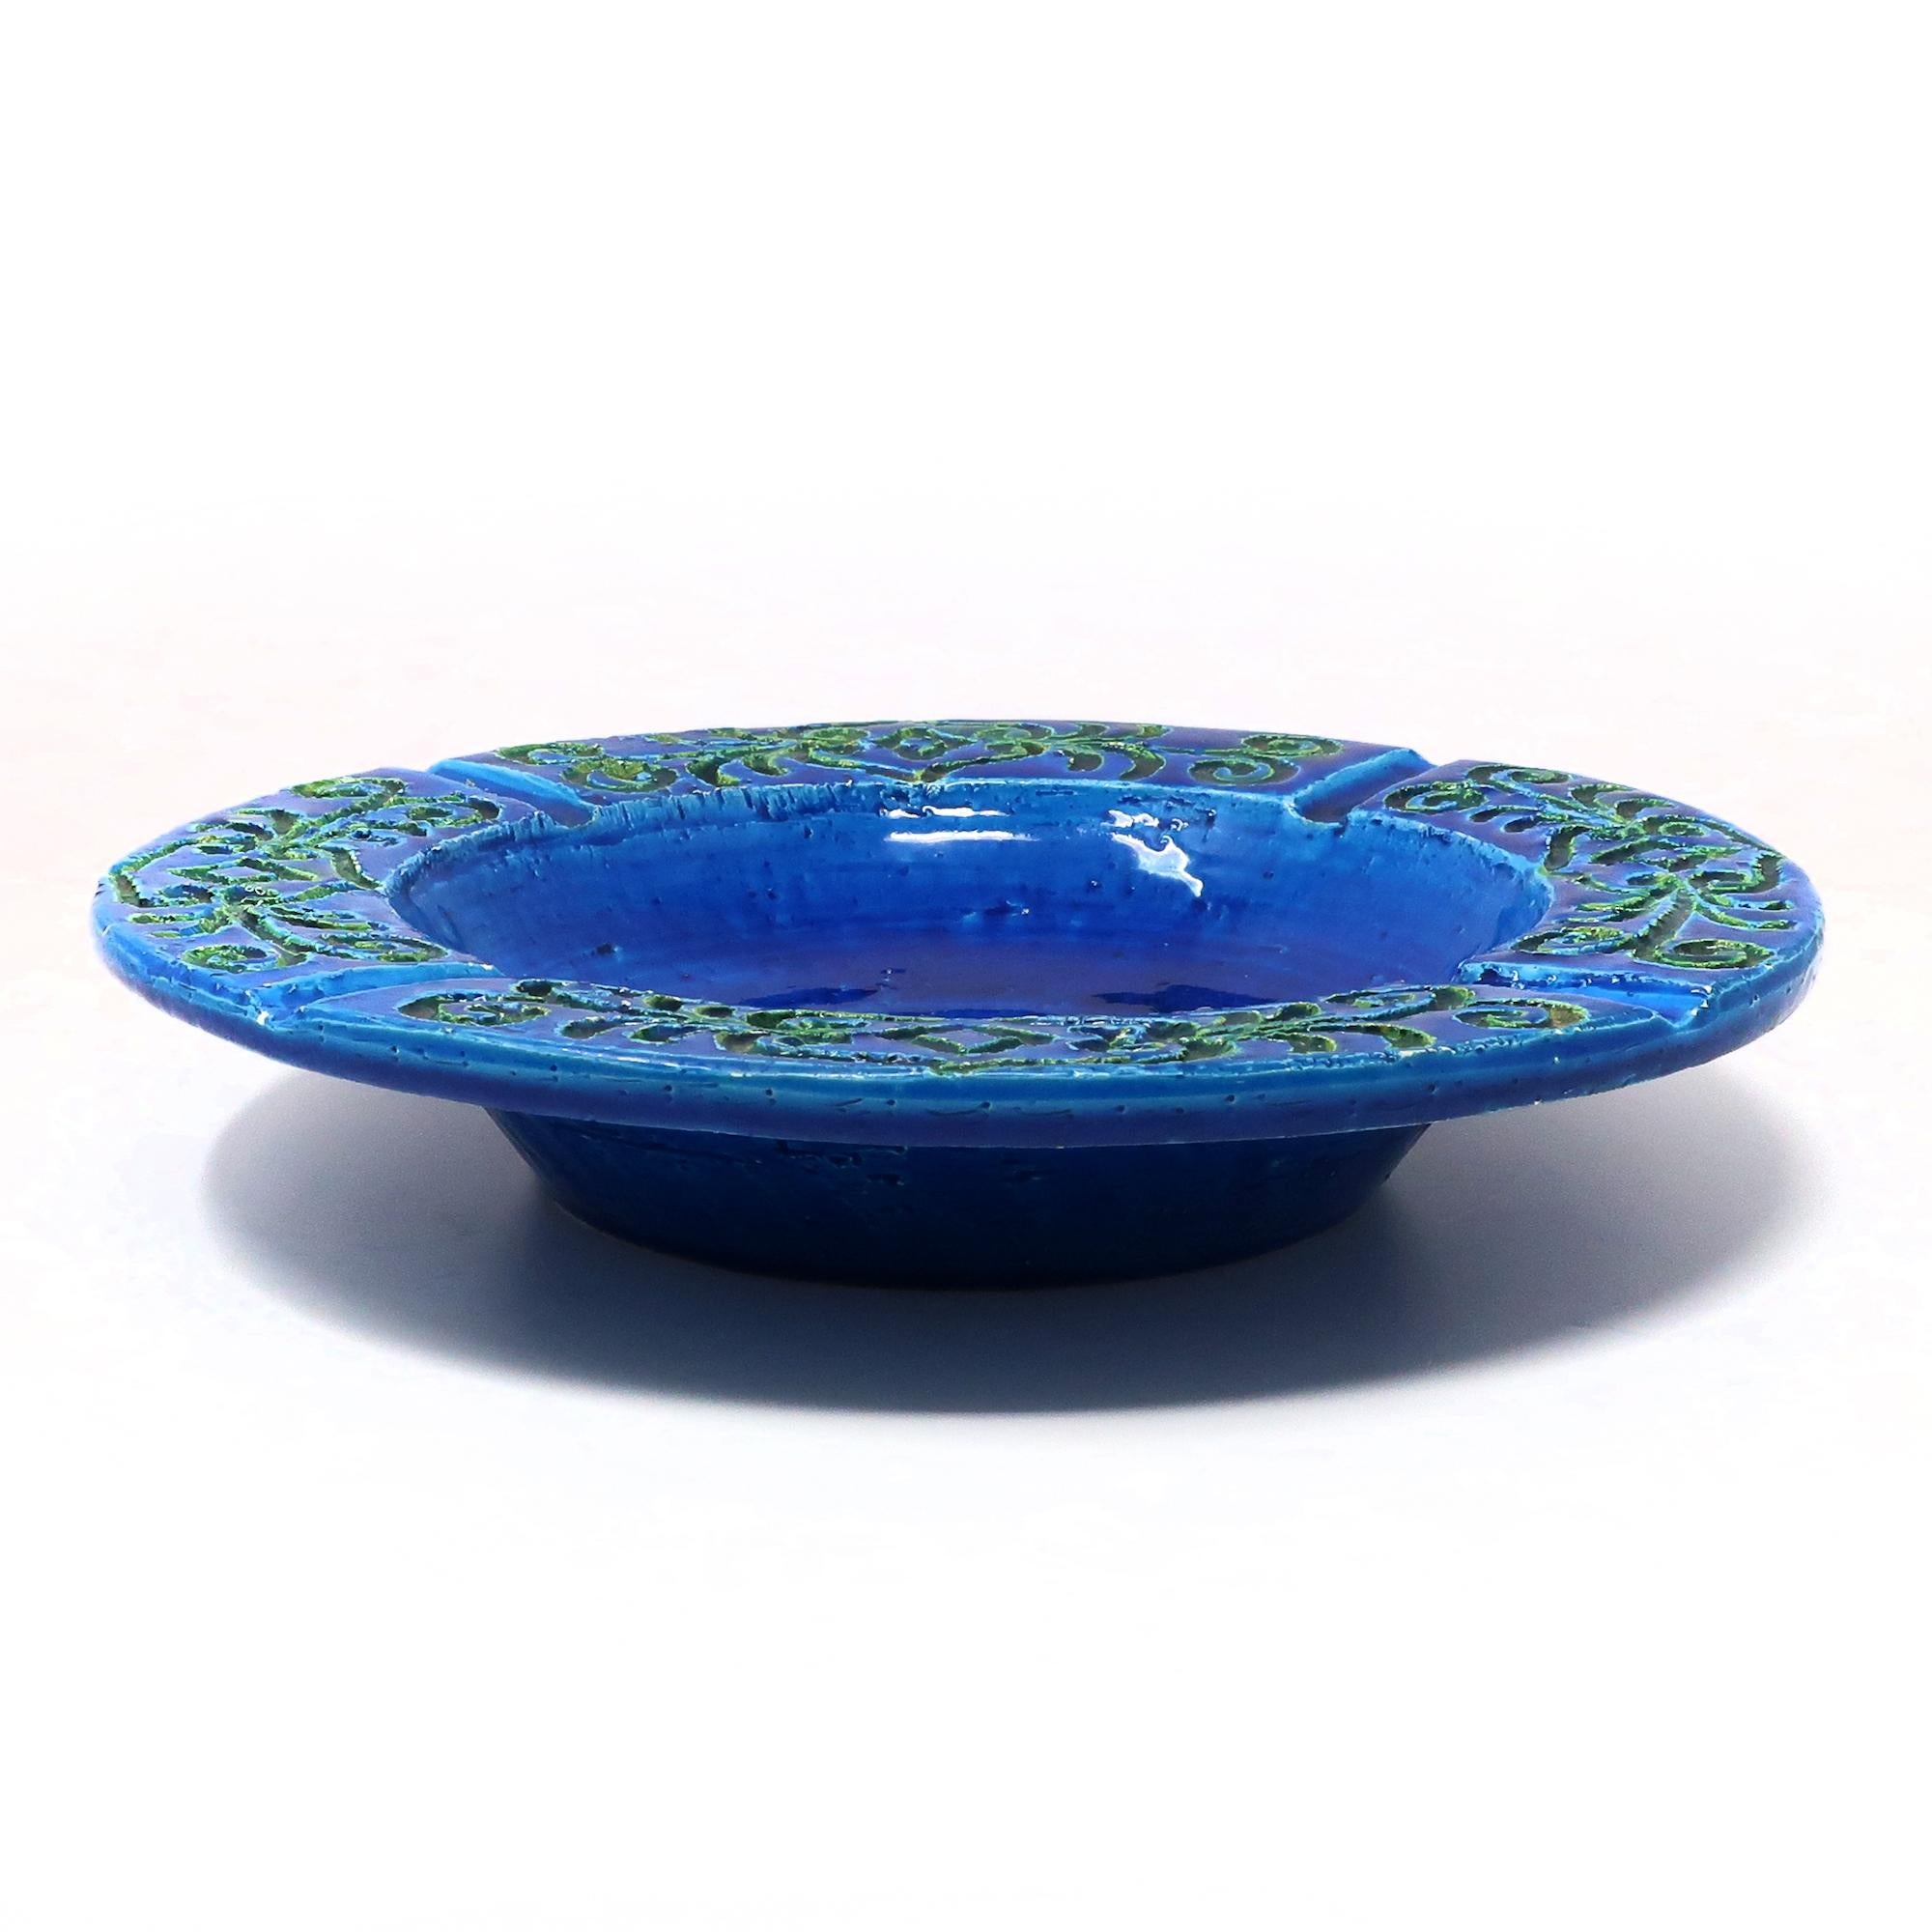 A beautiful large blue and green incised ceramic ashtray in the style of Aldo Londi’s Blue Rimini line for Bitossi.  Perfect for the 1960s smoking swagger enthusiast or as a decorative centerpiece or catchall. 

Glaze is bright and in good vintage